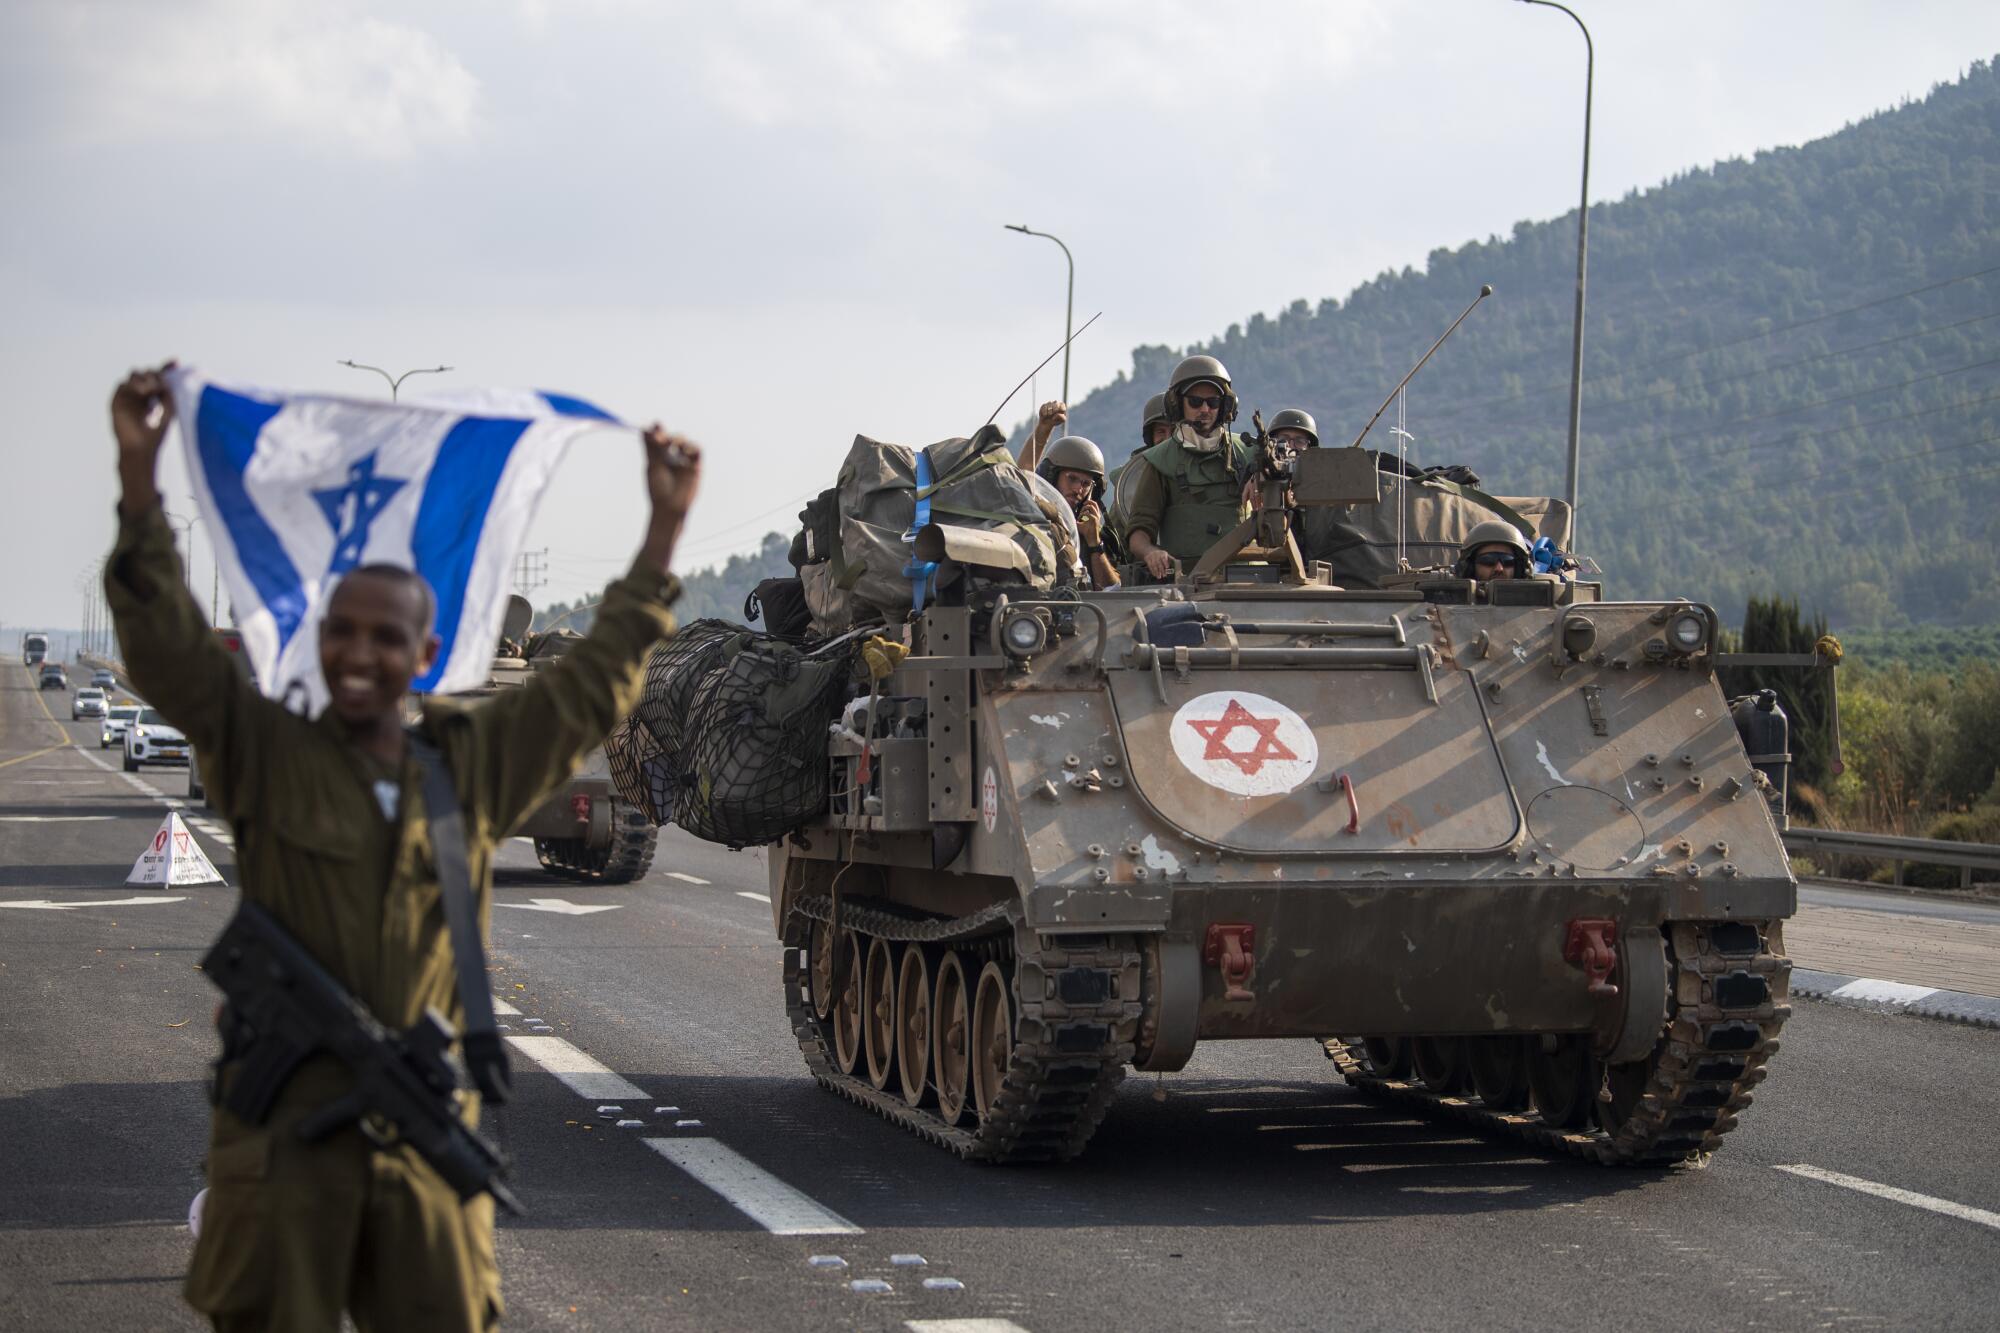 A man in fatigues holds up a blue-and-white flag as he stands on a road near an armored carrier with troops aboard 